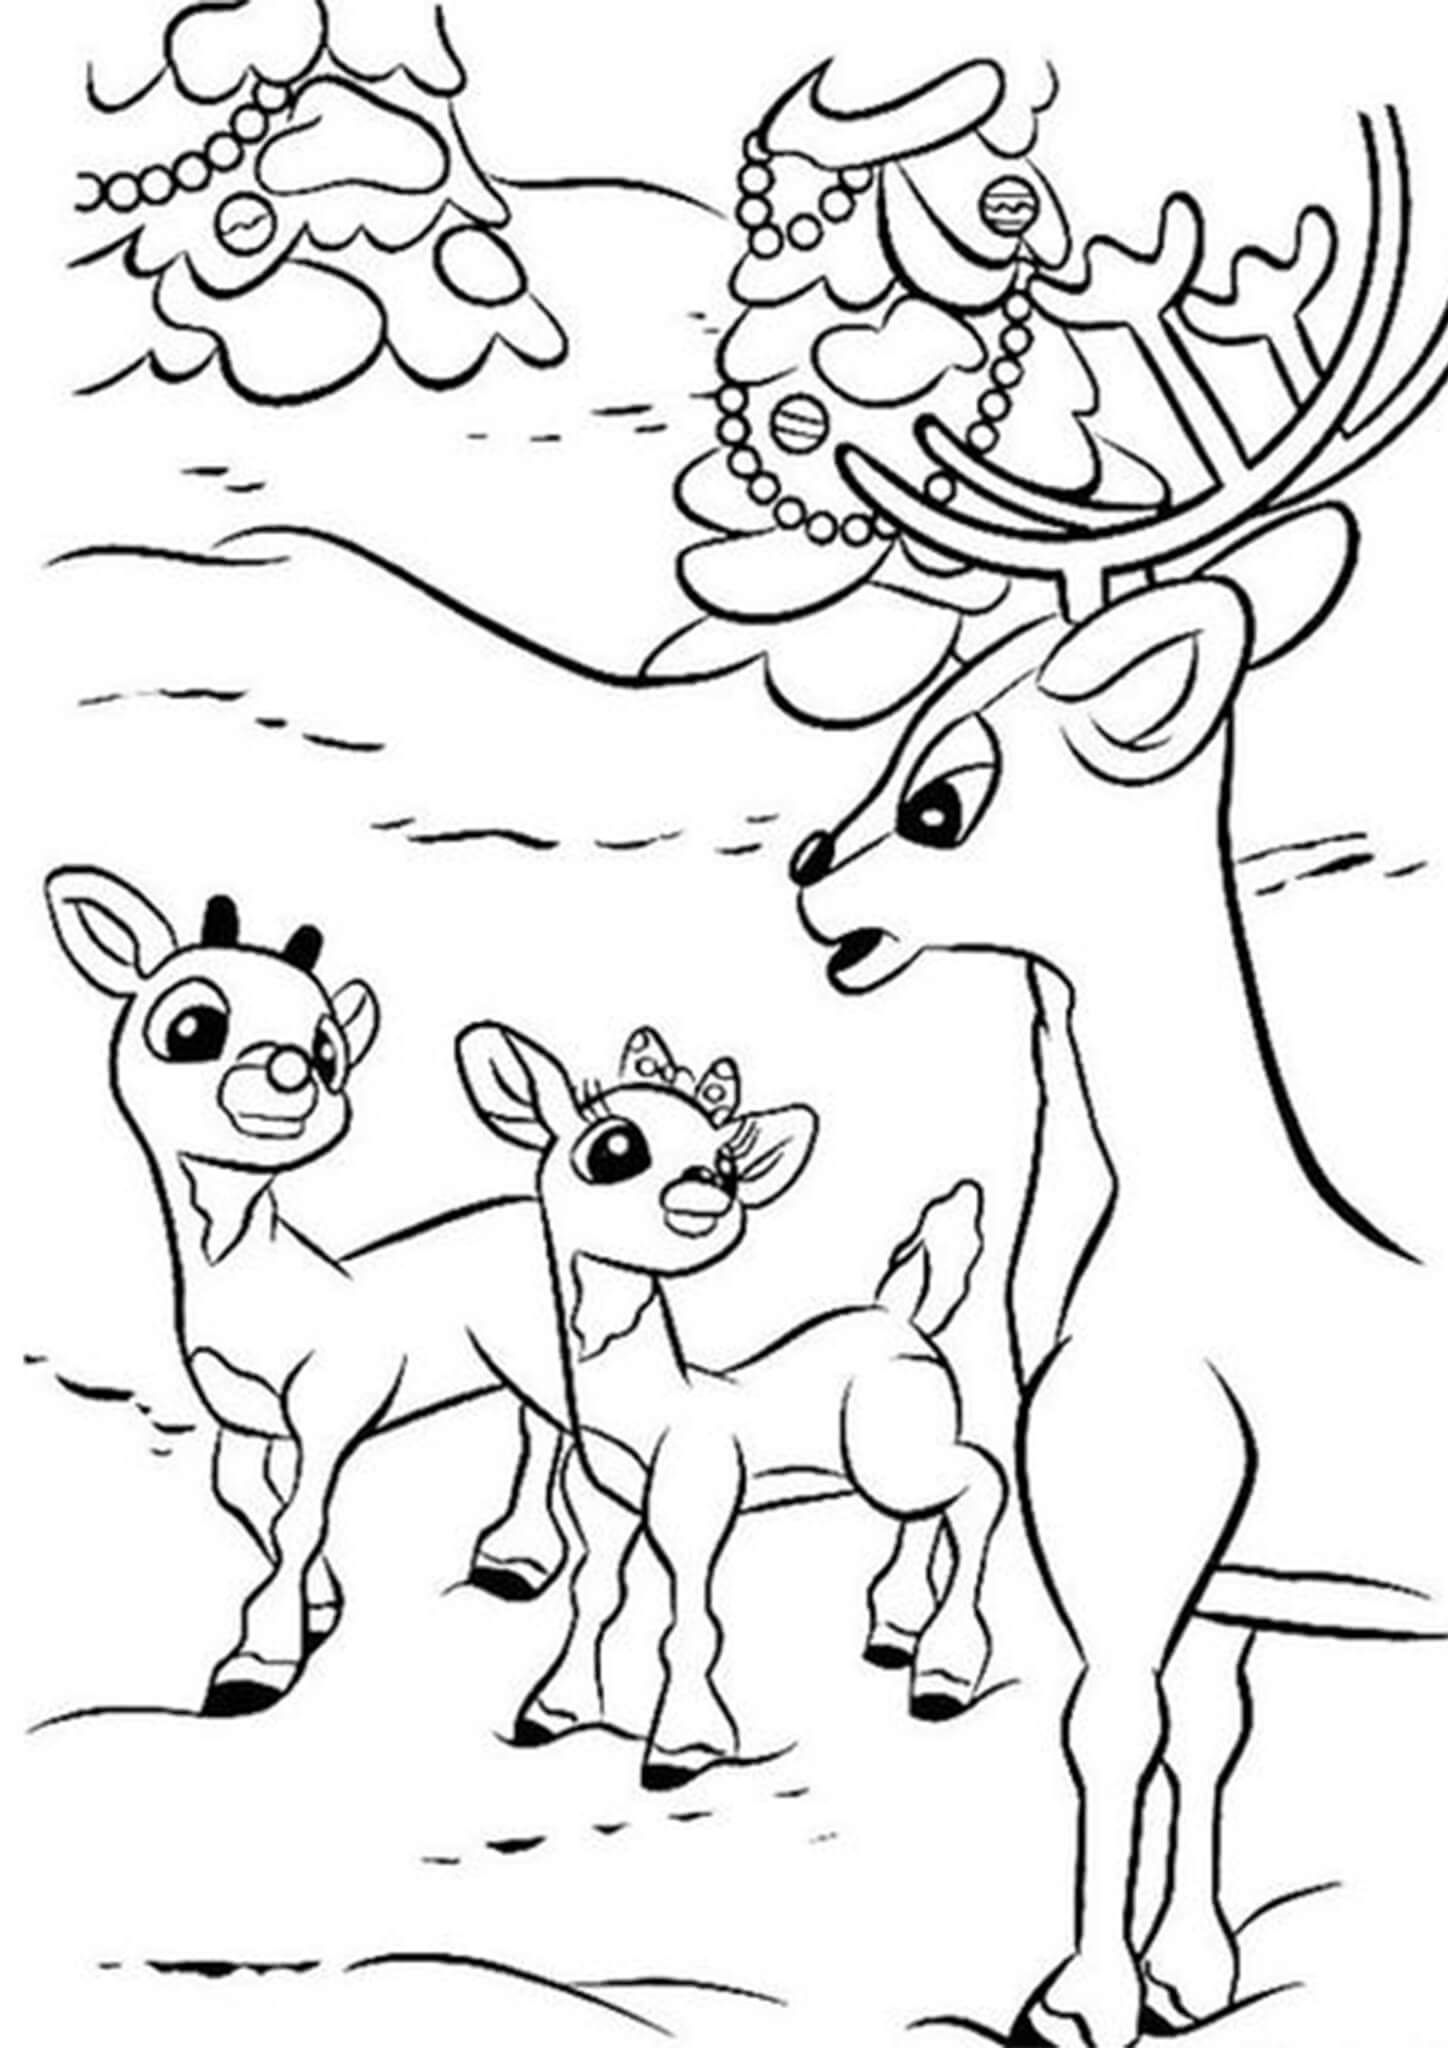 Rudolph the red nosed reindeer coloring pages rudolph coloring pages coloring pages christmas coloring sheets